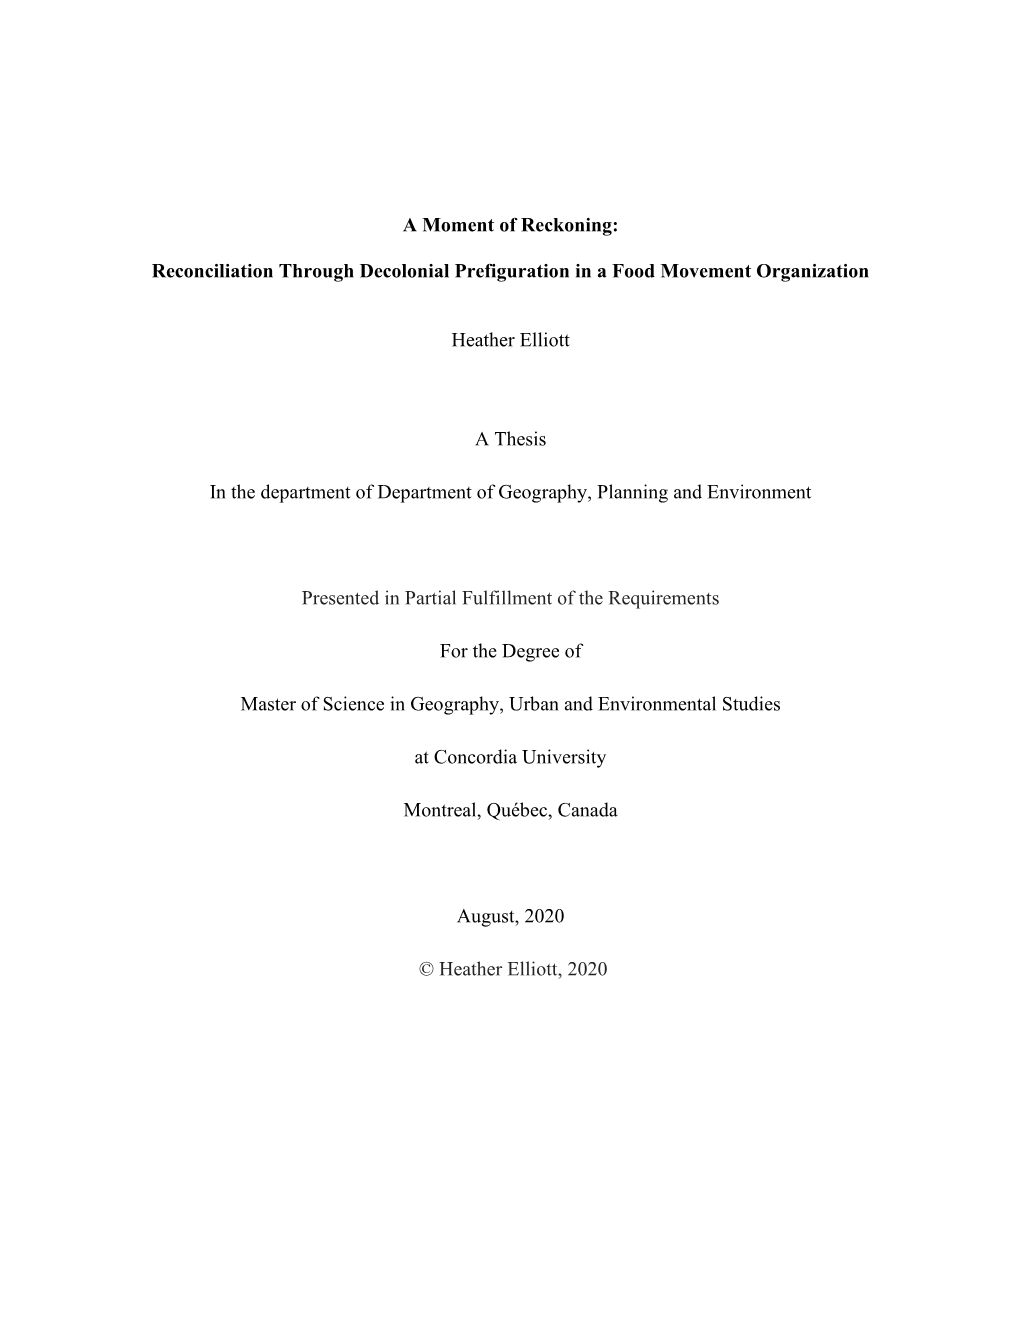 A Moment of Reckoning: Reconciliation Through Decolonial Prefiguration in a Food Movement Organization Heather Elliott a Thesis